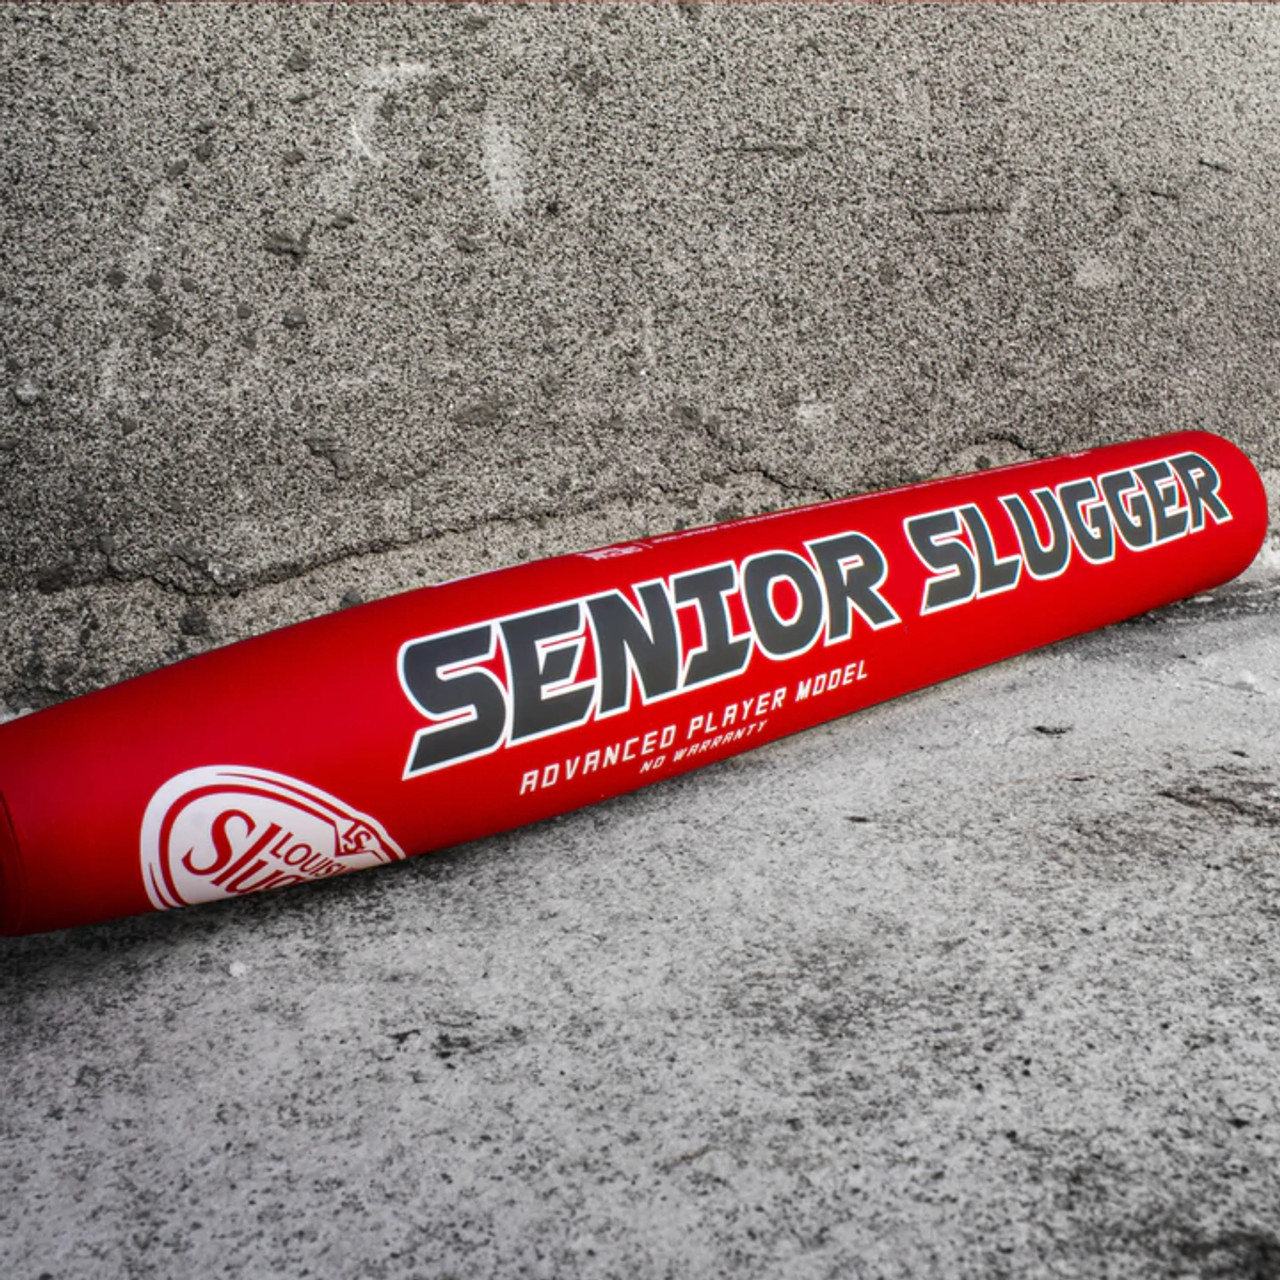 Louisville Slugger Red Slowpitch Softball Bats for sale